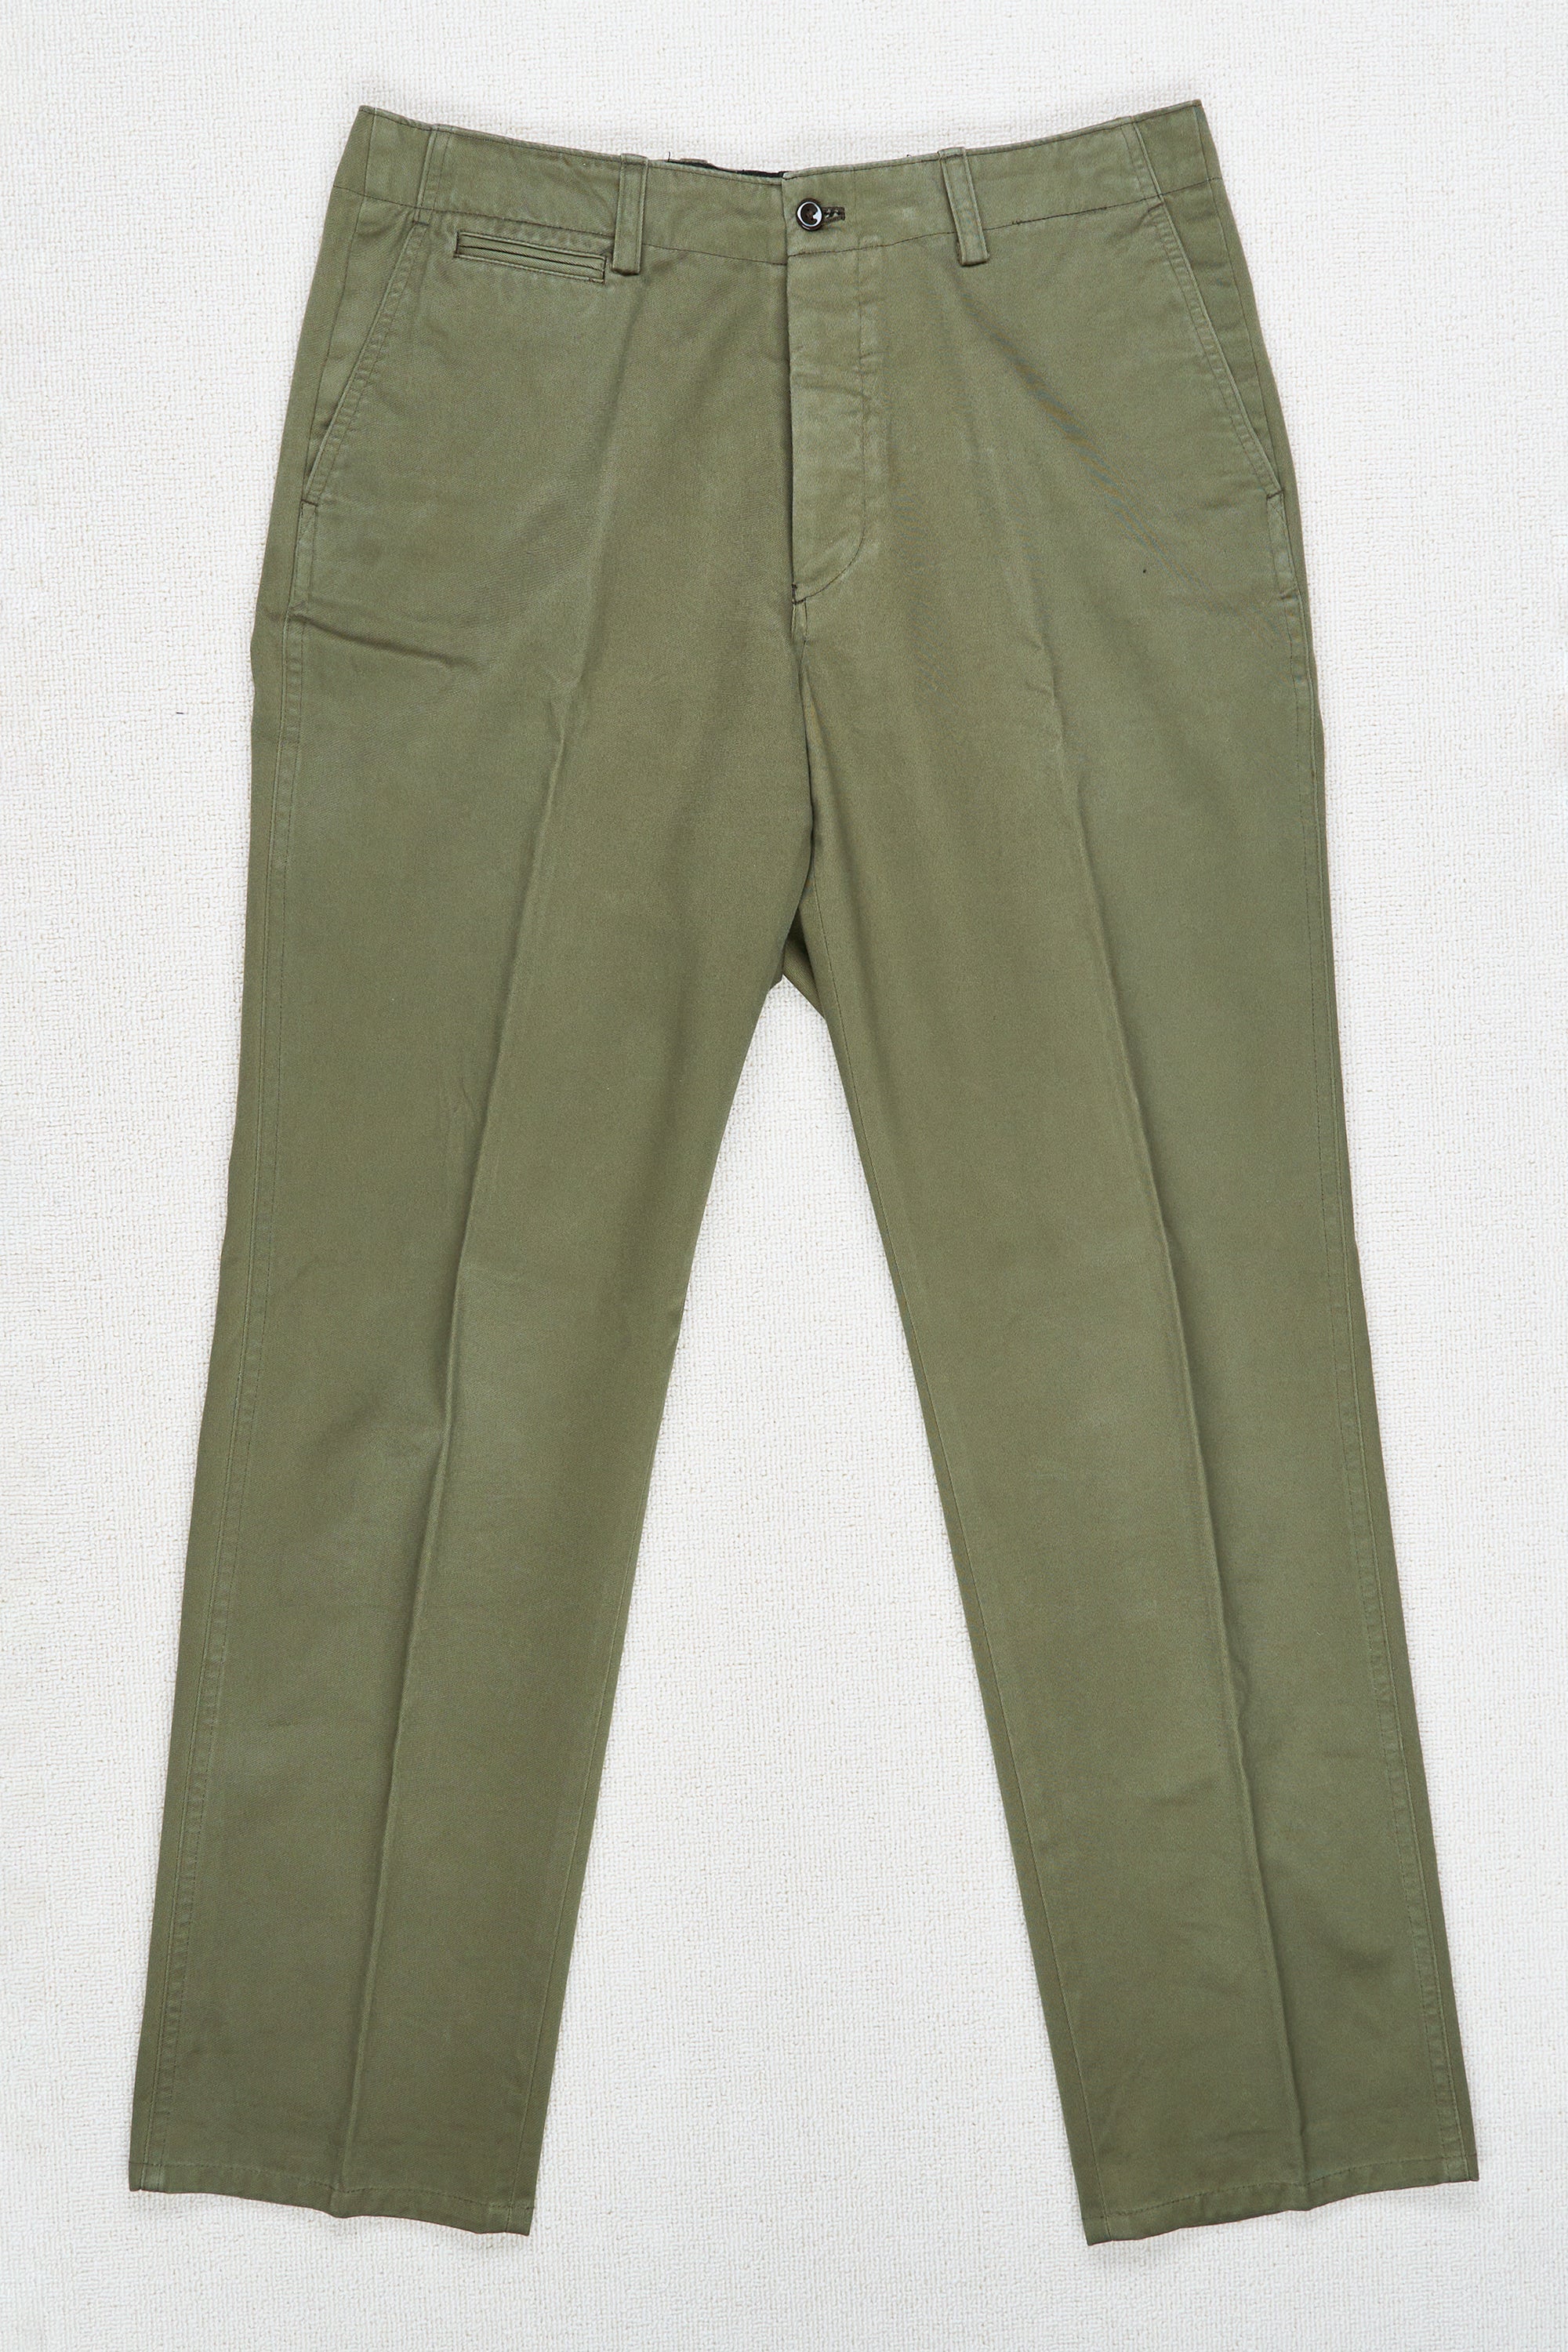 The Armoury by Ring Jacket Model A Olive Cotton Sport Chinos